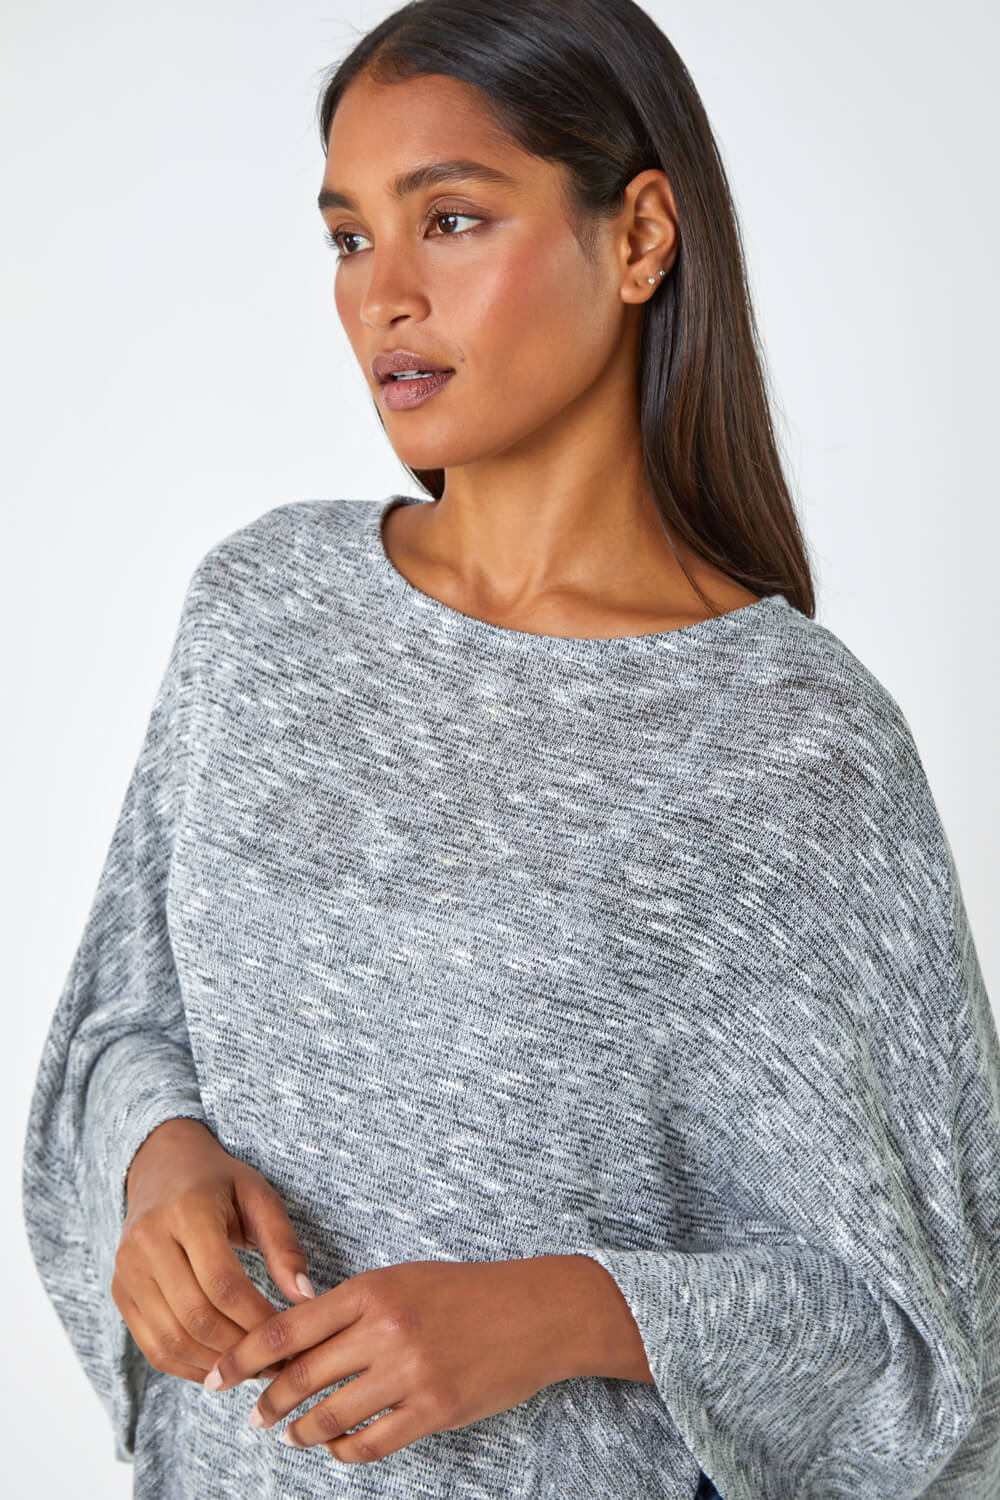 Grey Marl Stretch Knit Jersey Top, Image 4 of 5